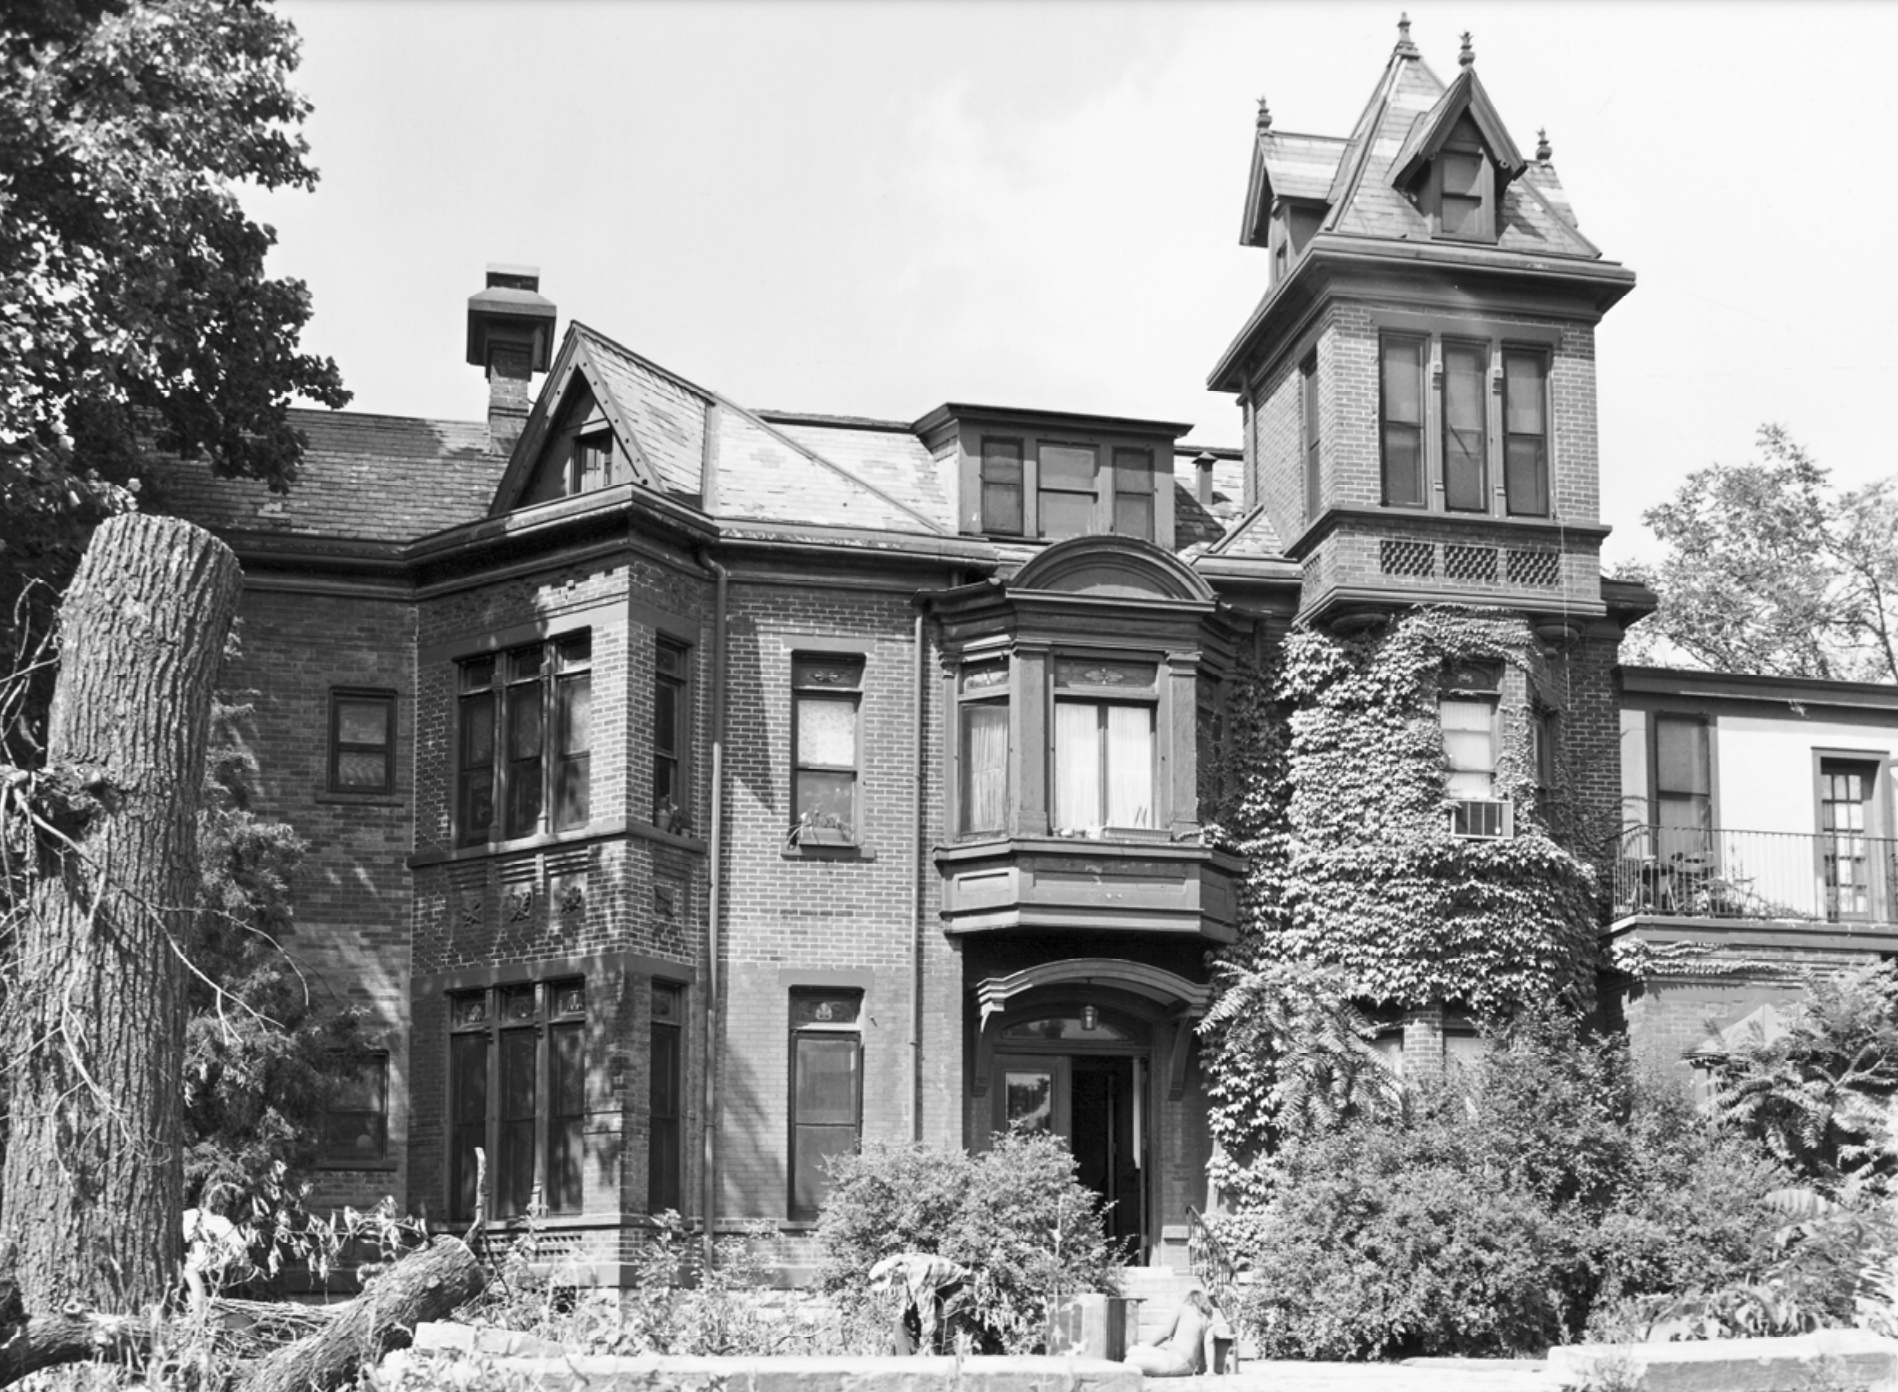 This is a 1971 image of the Mercer Mansion at 3920 Cuming Street in the Walnut Hill neighborhood of North Omaha, Nebraska. Courtesy of the City of Omaha.